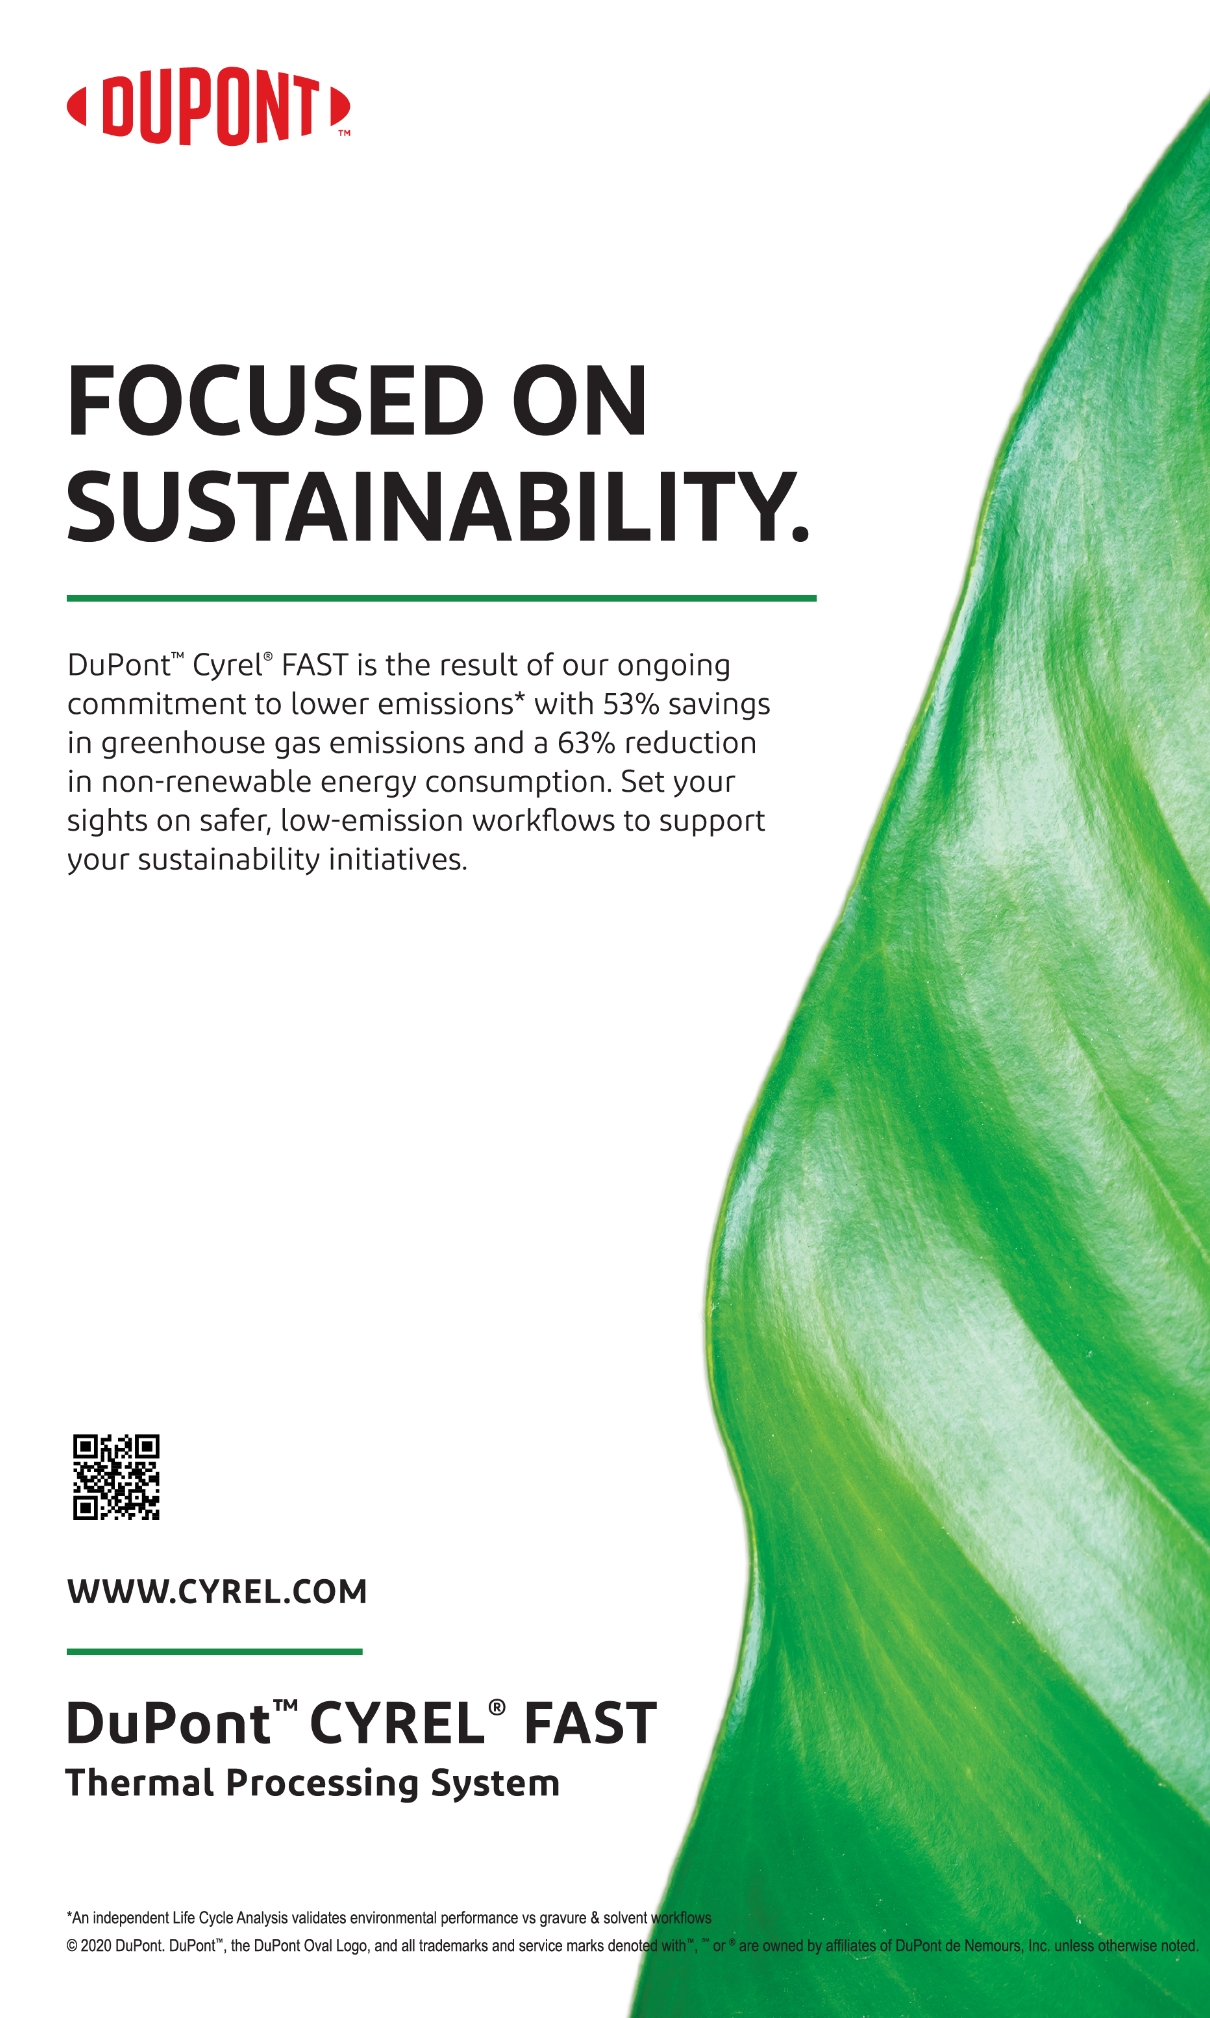 DuPont Cyrel - Advertising Campaign